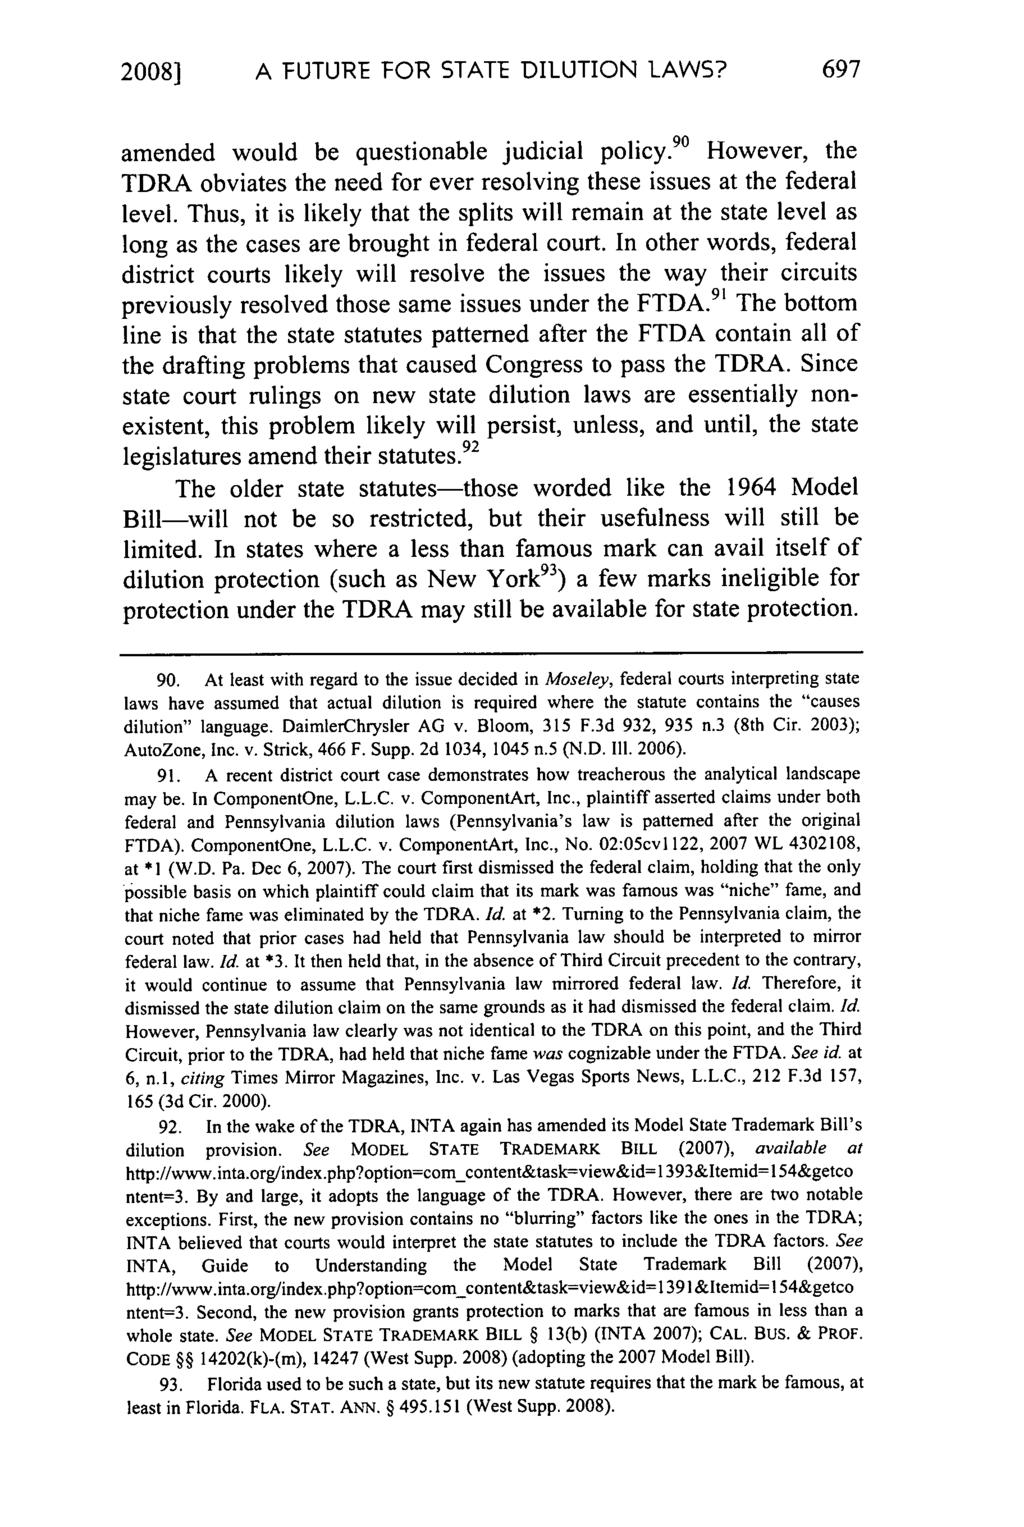 2008] A FUTURE FOR STATE DILUTION LAWS? amended would be questionable judicial policy. 90 However, the TDRA obviates the need for ever resolving these issues at the federal level.